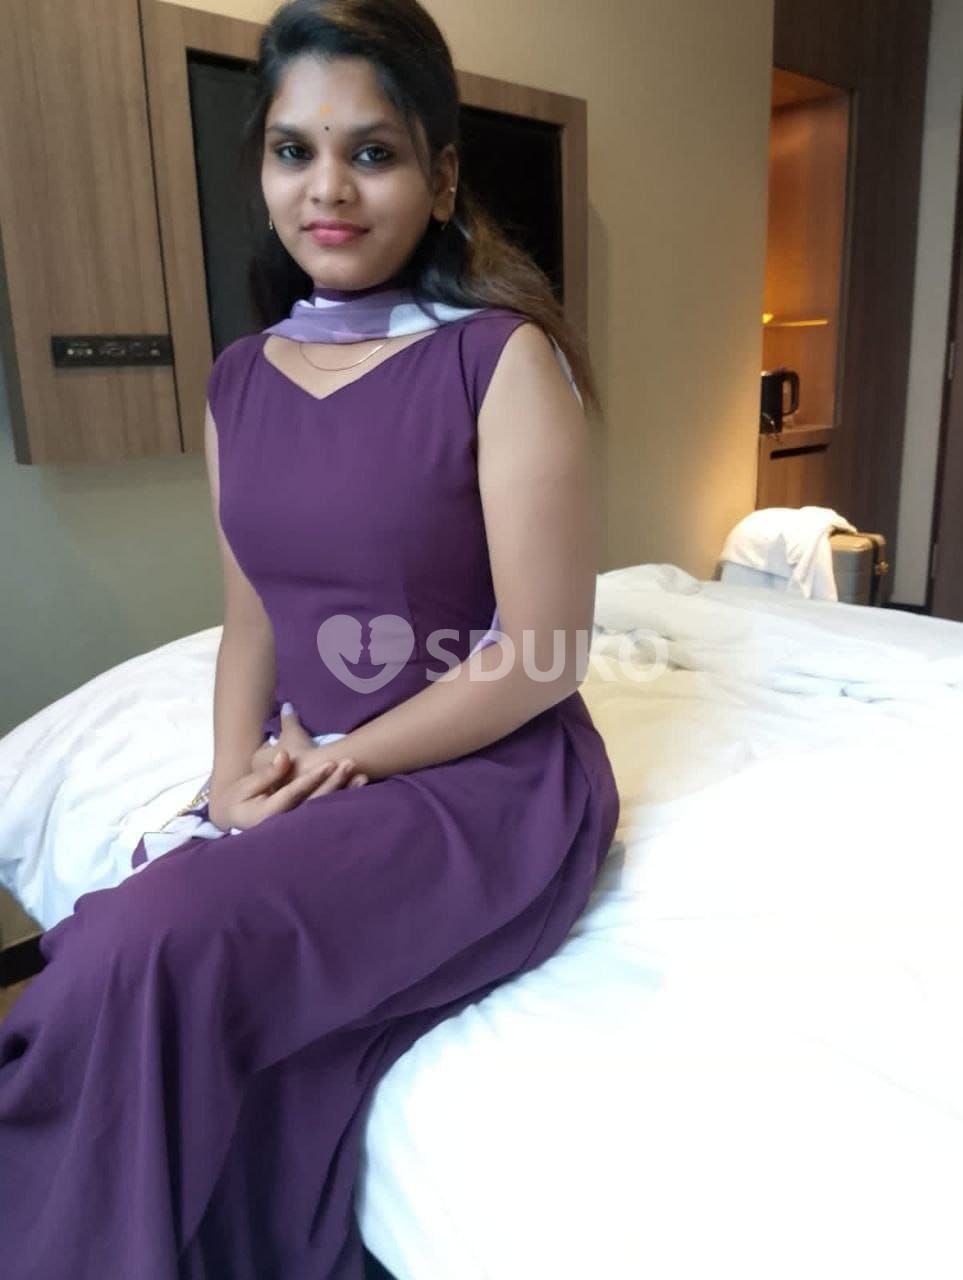 Mangalore ✨ call girl service ⭐24 available VIP genuine service out call in ✨call available ⭐⭐⭐⭐⭐⭐⭐